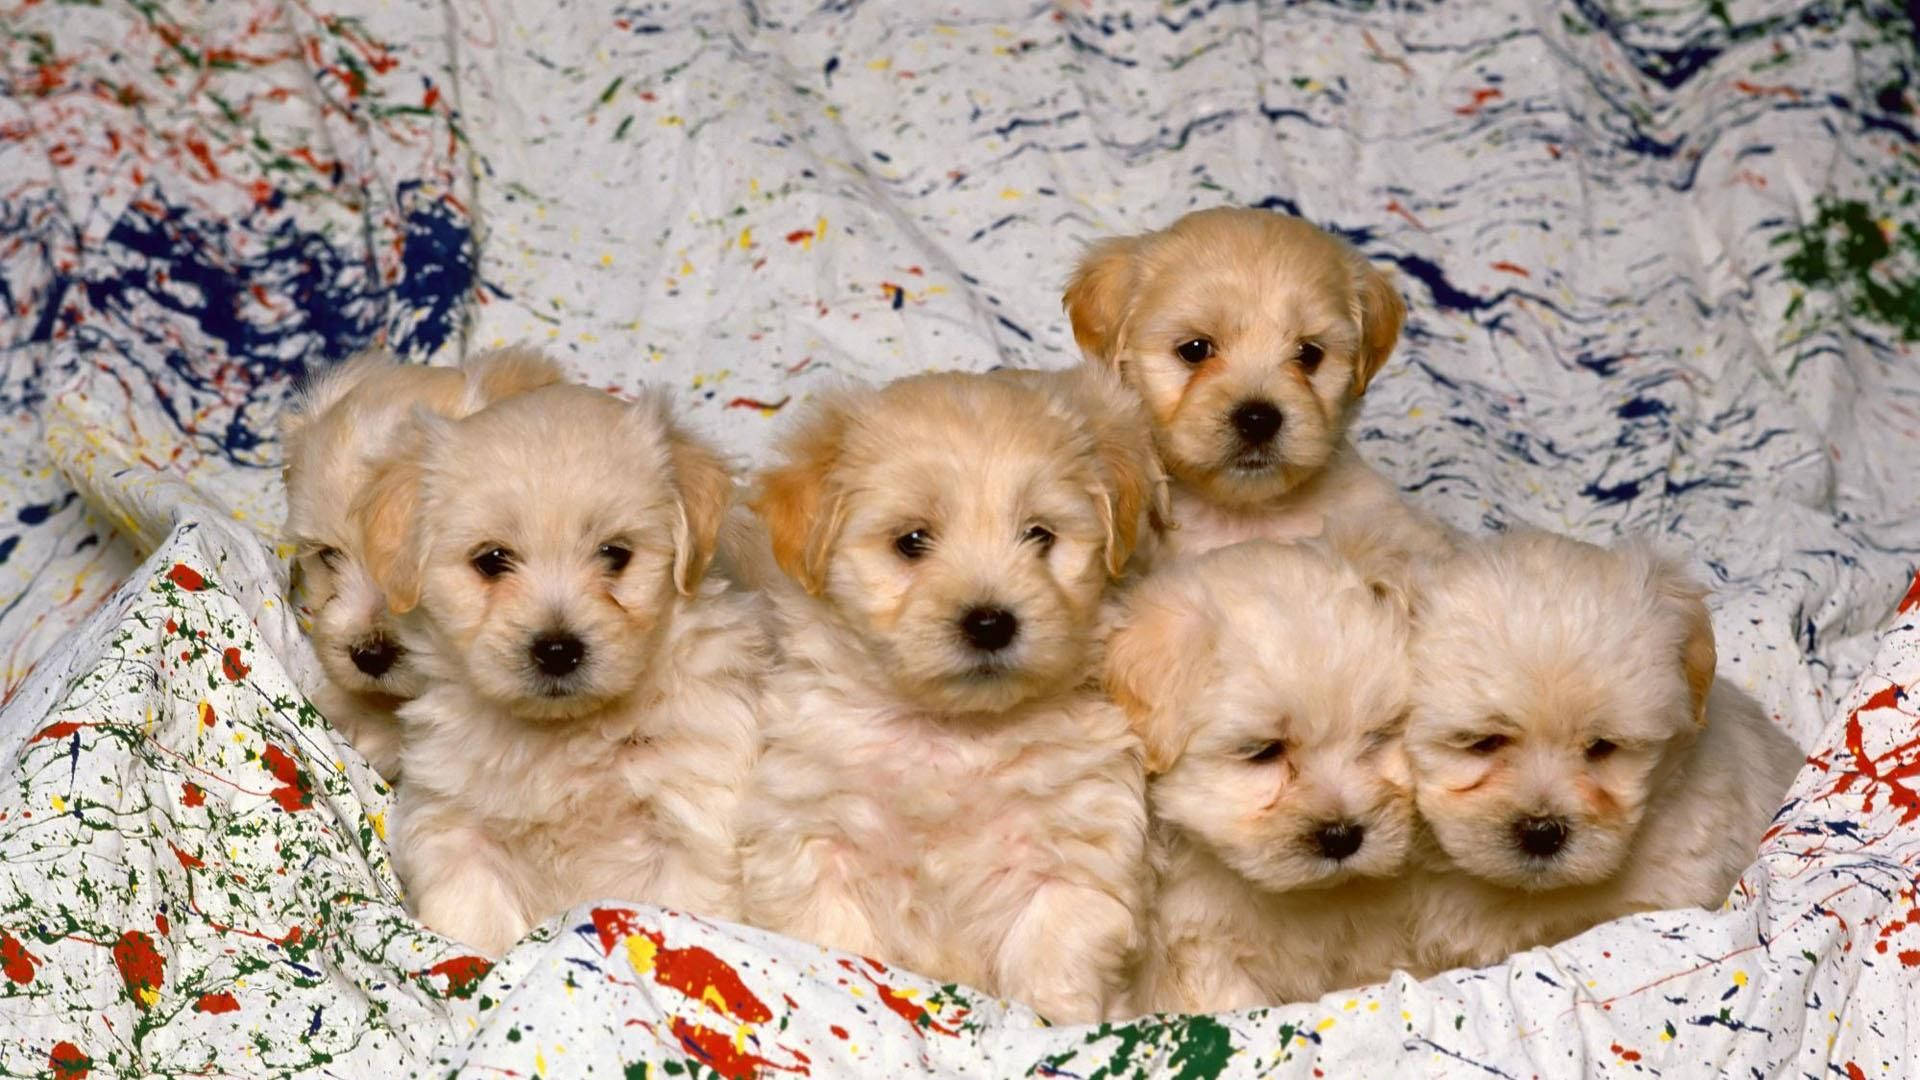 Puppies On Colorful Blanket Background